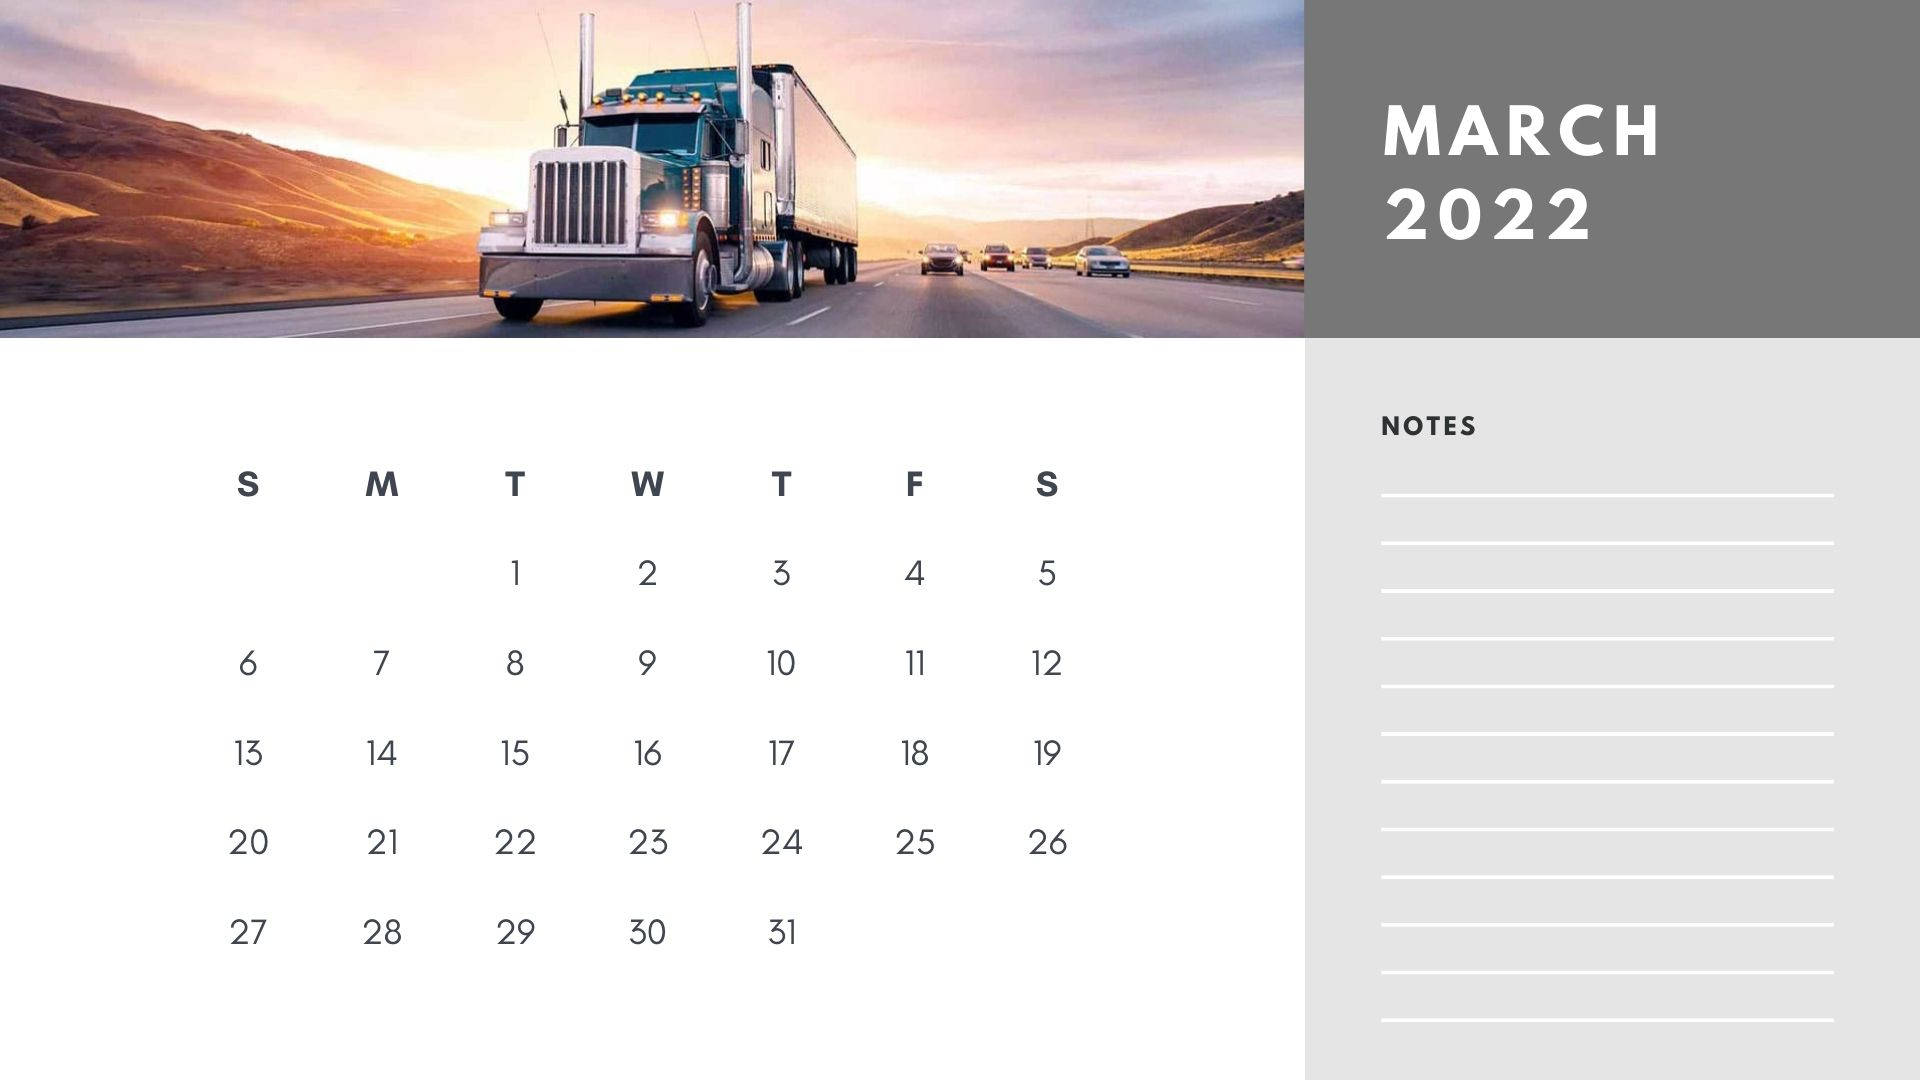 March 2022 Calendar Notes Background